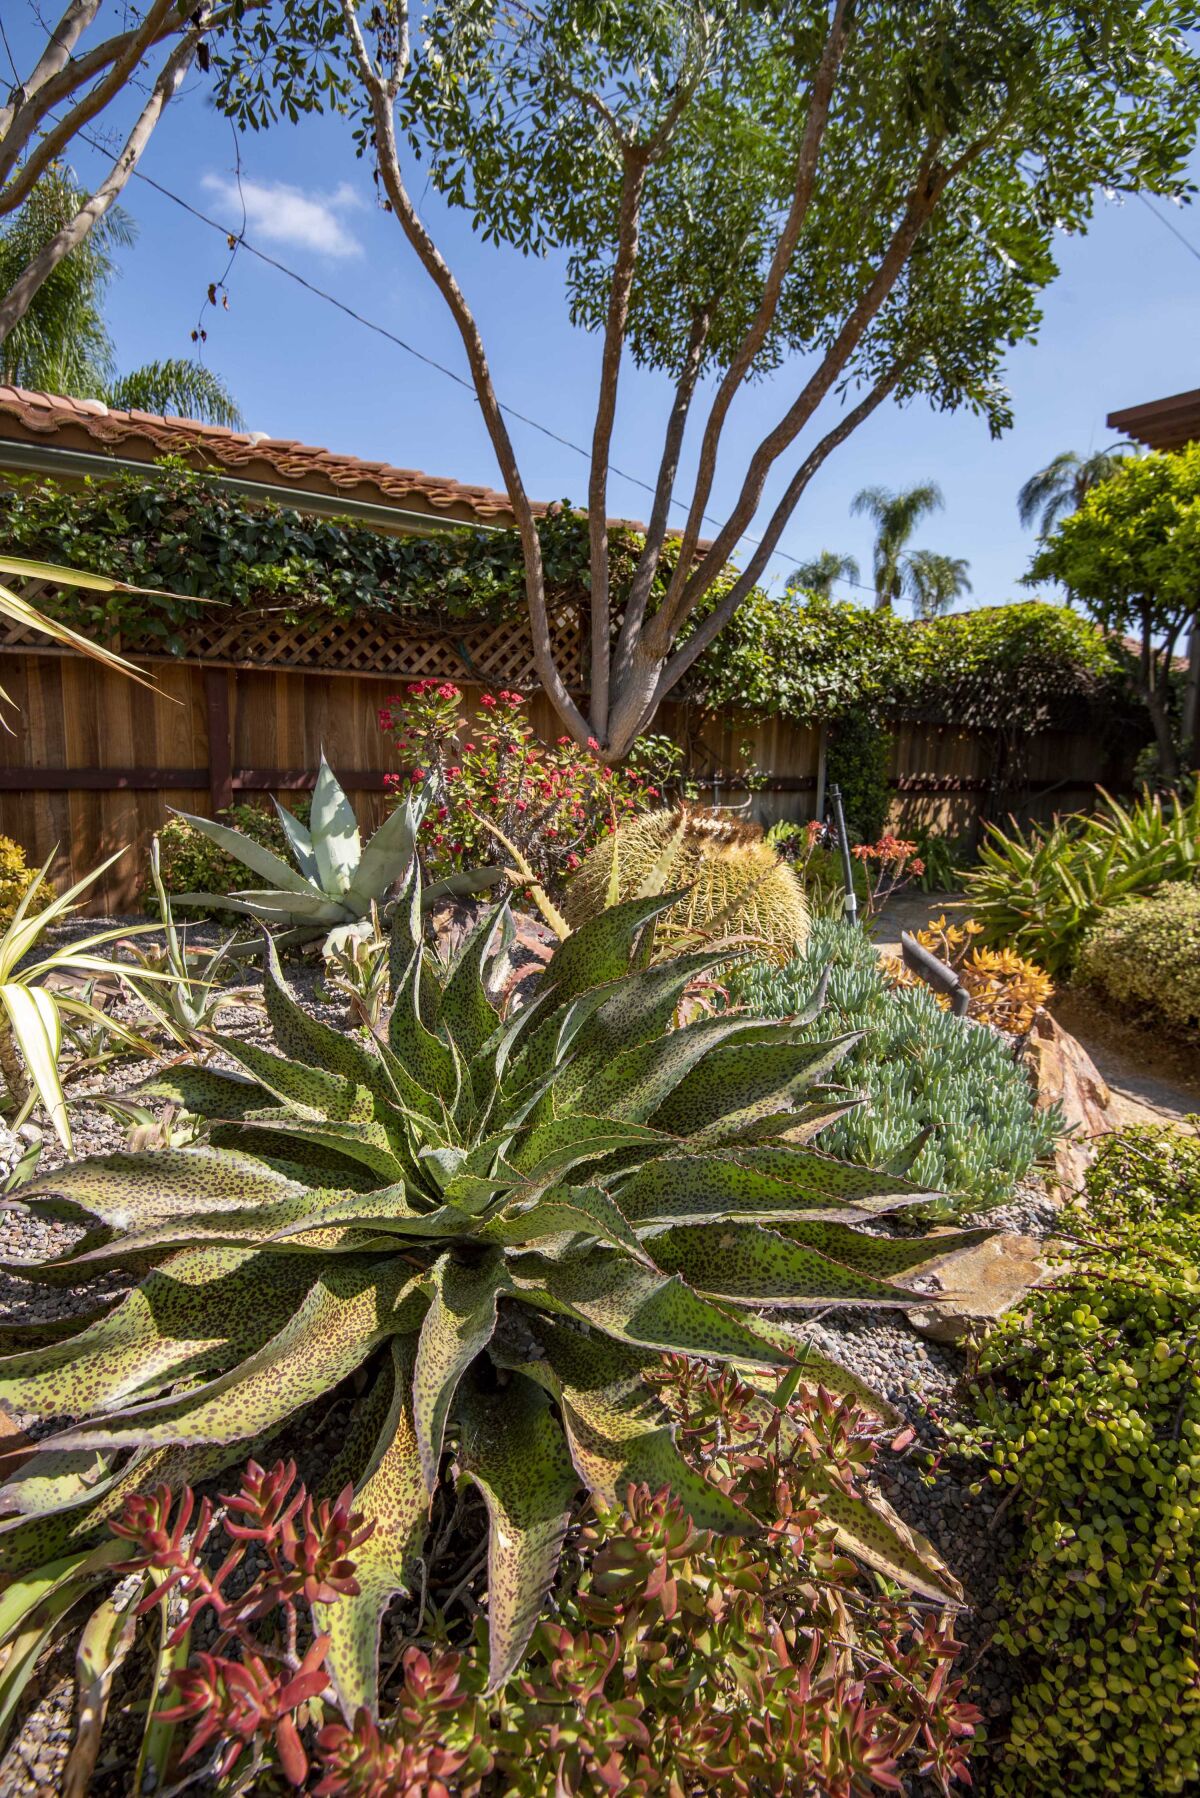 A collection of striking succulents in a featured garden.